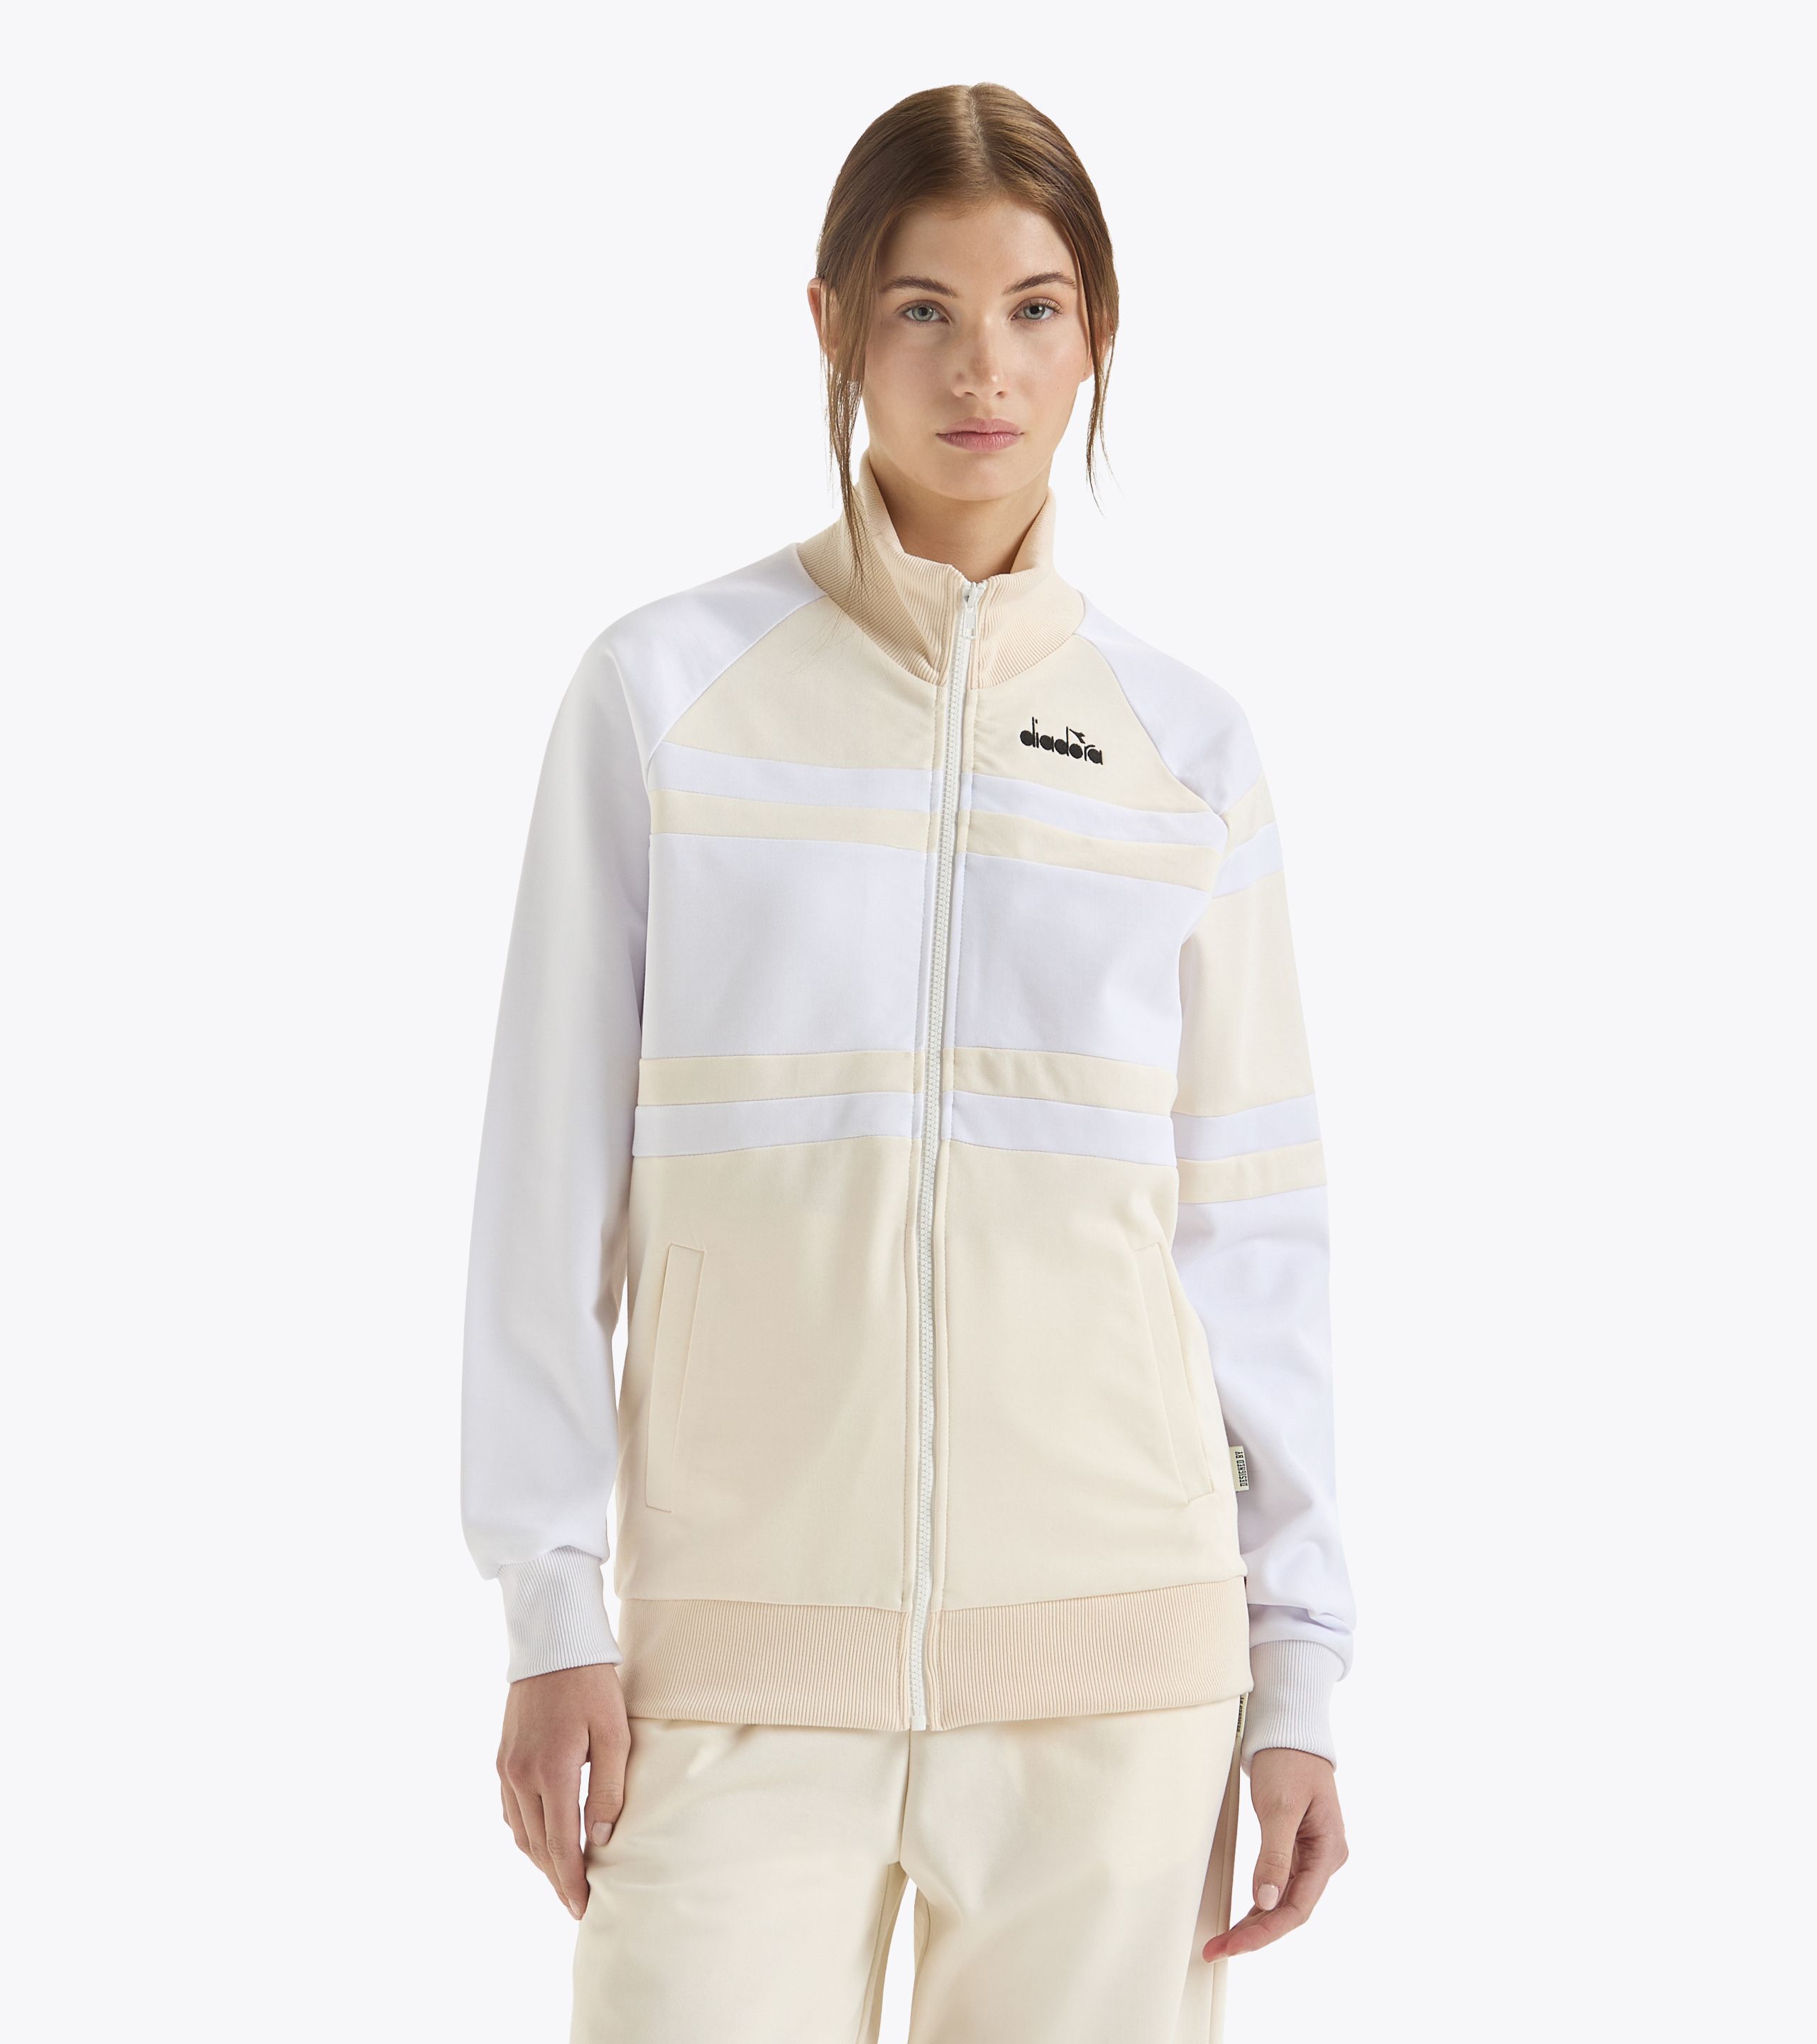 Sports Jacket in Off-White – Mohawk General Store